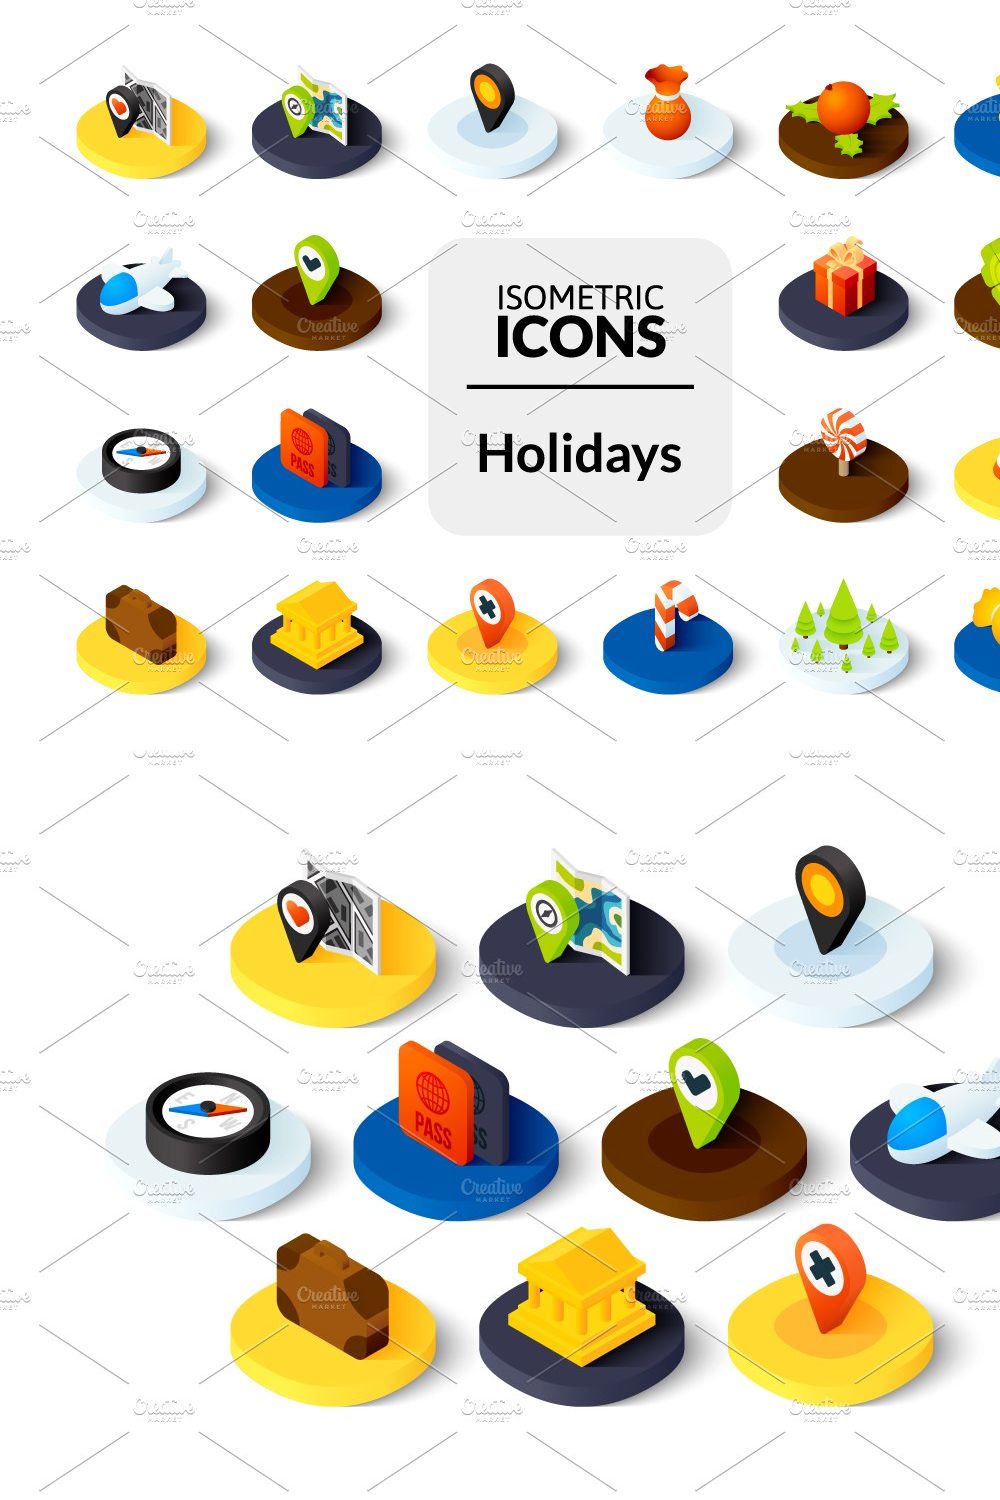 Isometric icons - Holidays pinterest preview image.